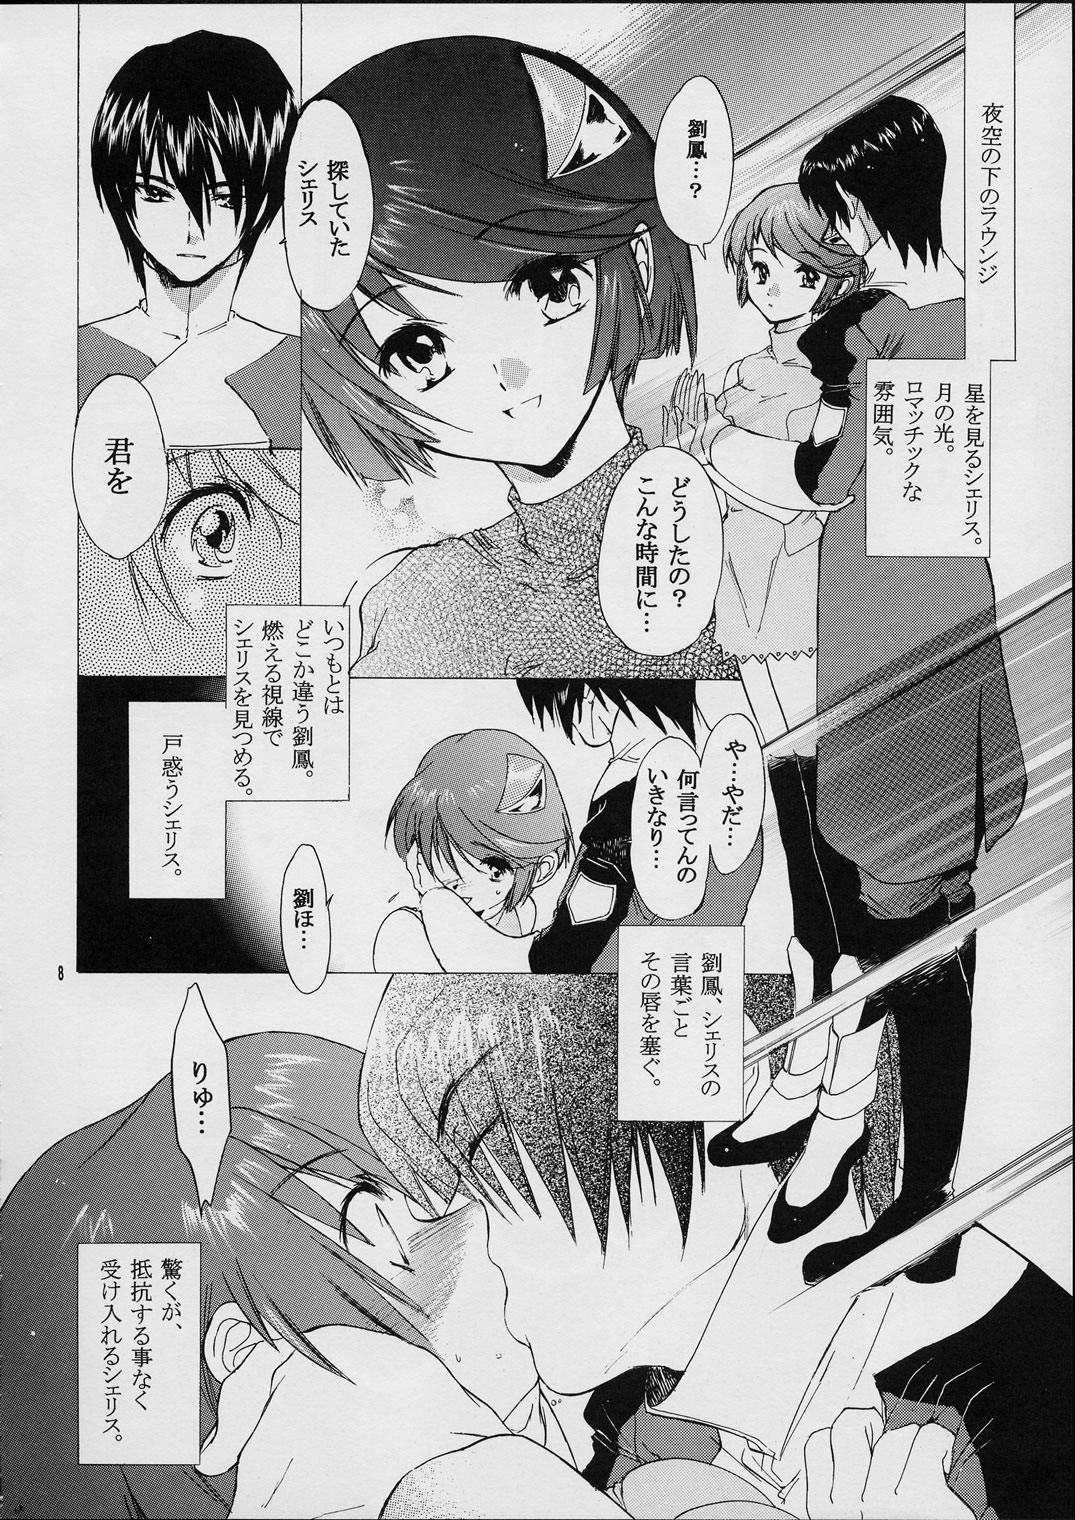 [Toko-ya] Ordinary Day at HOLY; Peaceful Day (sCryEd) [床子屋 (鬼頭えん)] ホーリー的日常・或いは平穏な日 (スクライド)